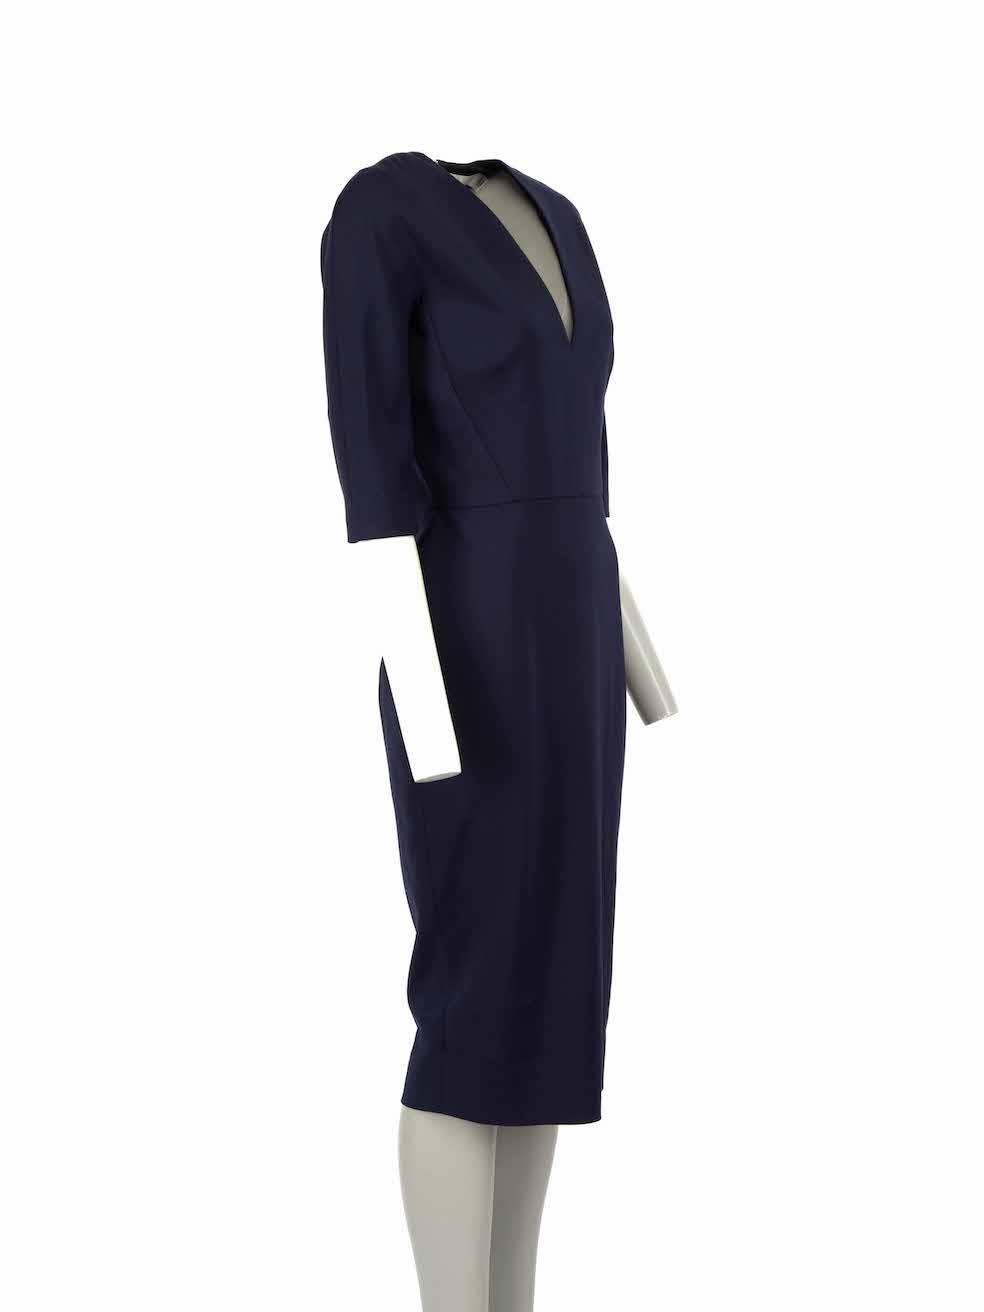 CONDITION is Never worn, with tags. No visible wear to dress is evident on this new Victoria Beckham designer resale item.
 
Details
Navy
Cotton
Midi dress
V neckline
Tailored and bodycon
Buttoned cuffs
Back double zip closure
 
Made in England
